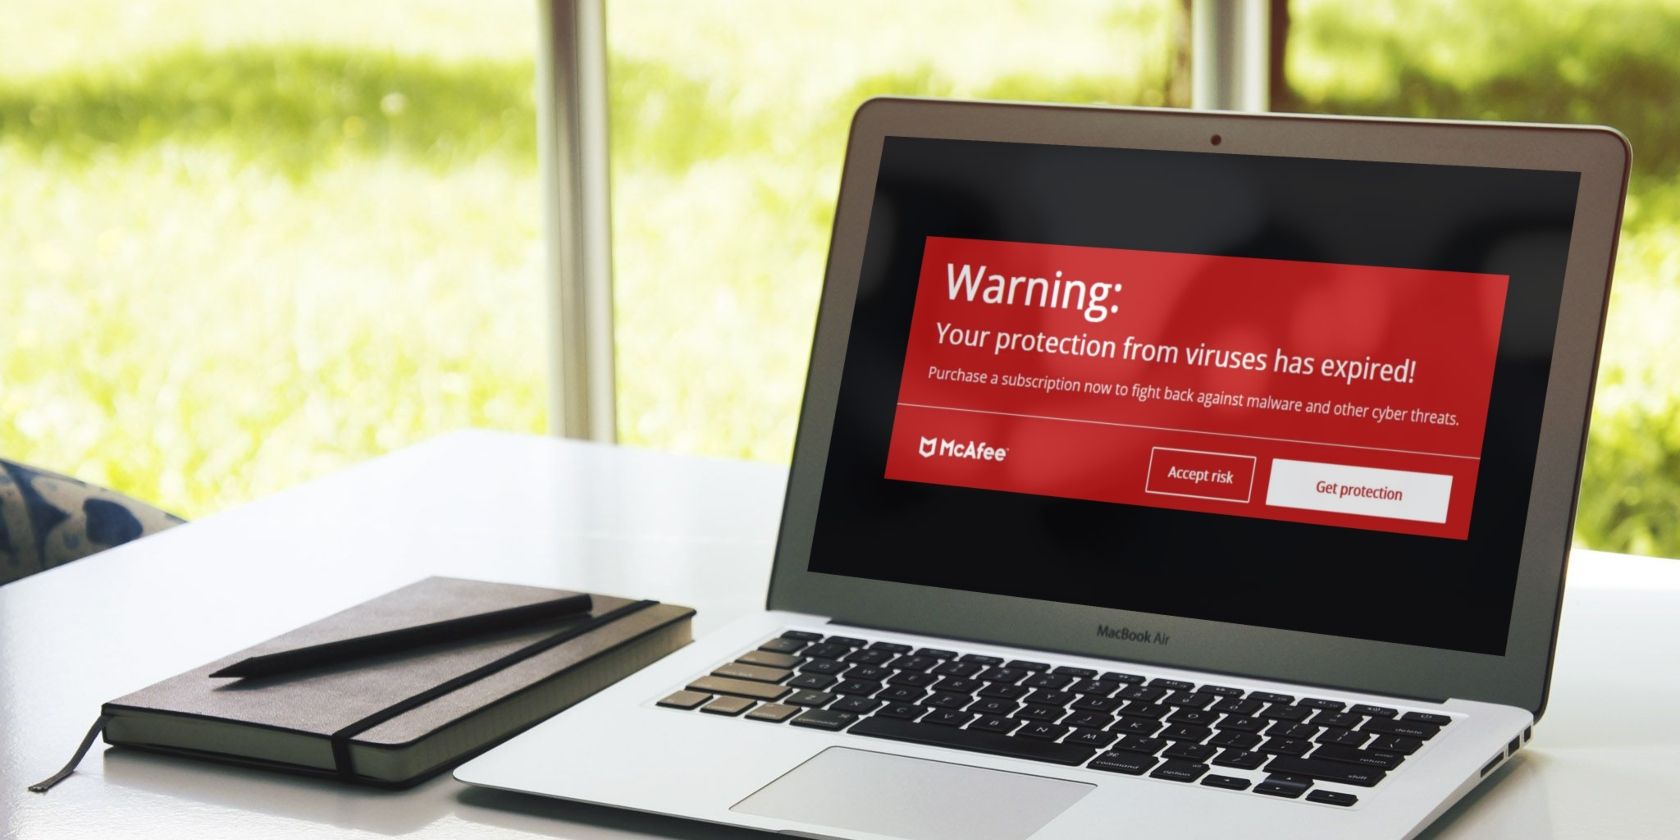 What Is the McAfee Virus Pop-Up Scam? How to Get Rid of It